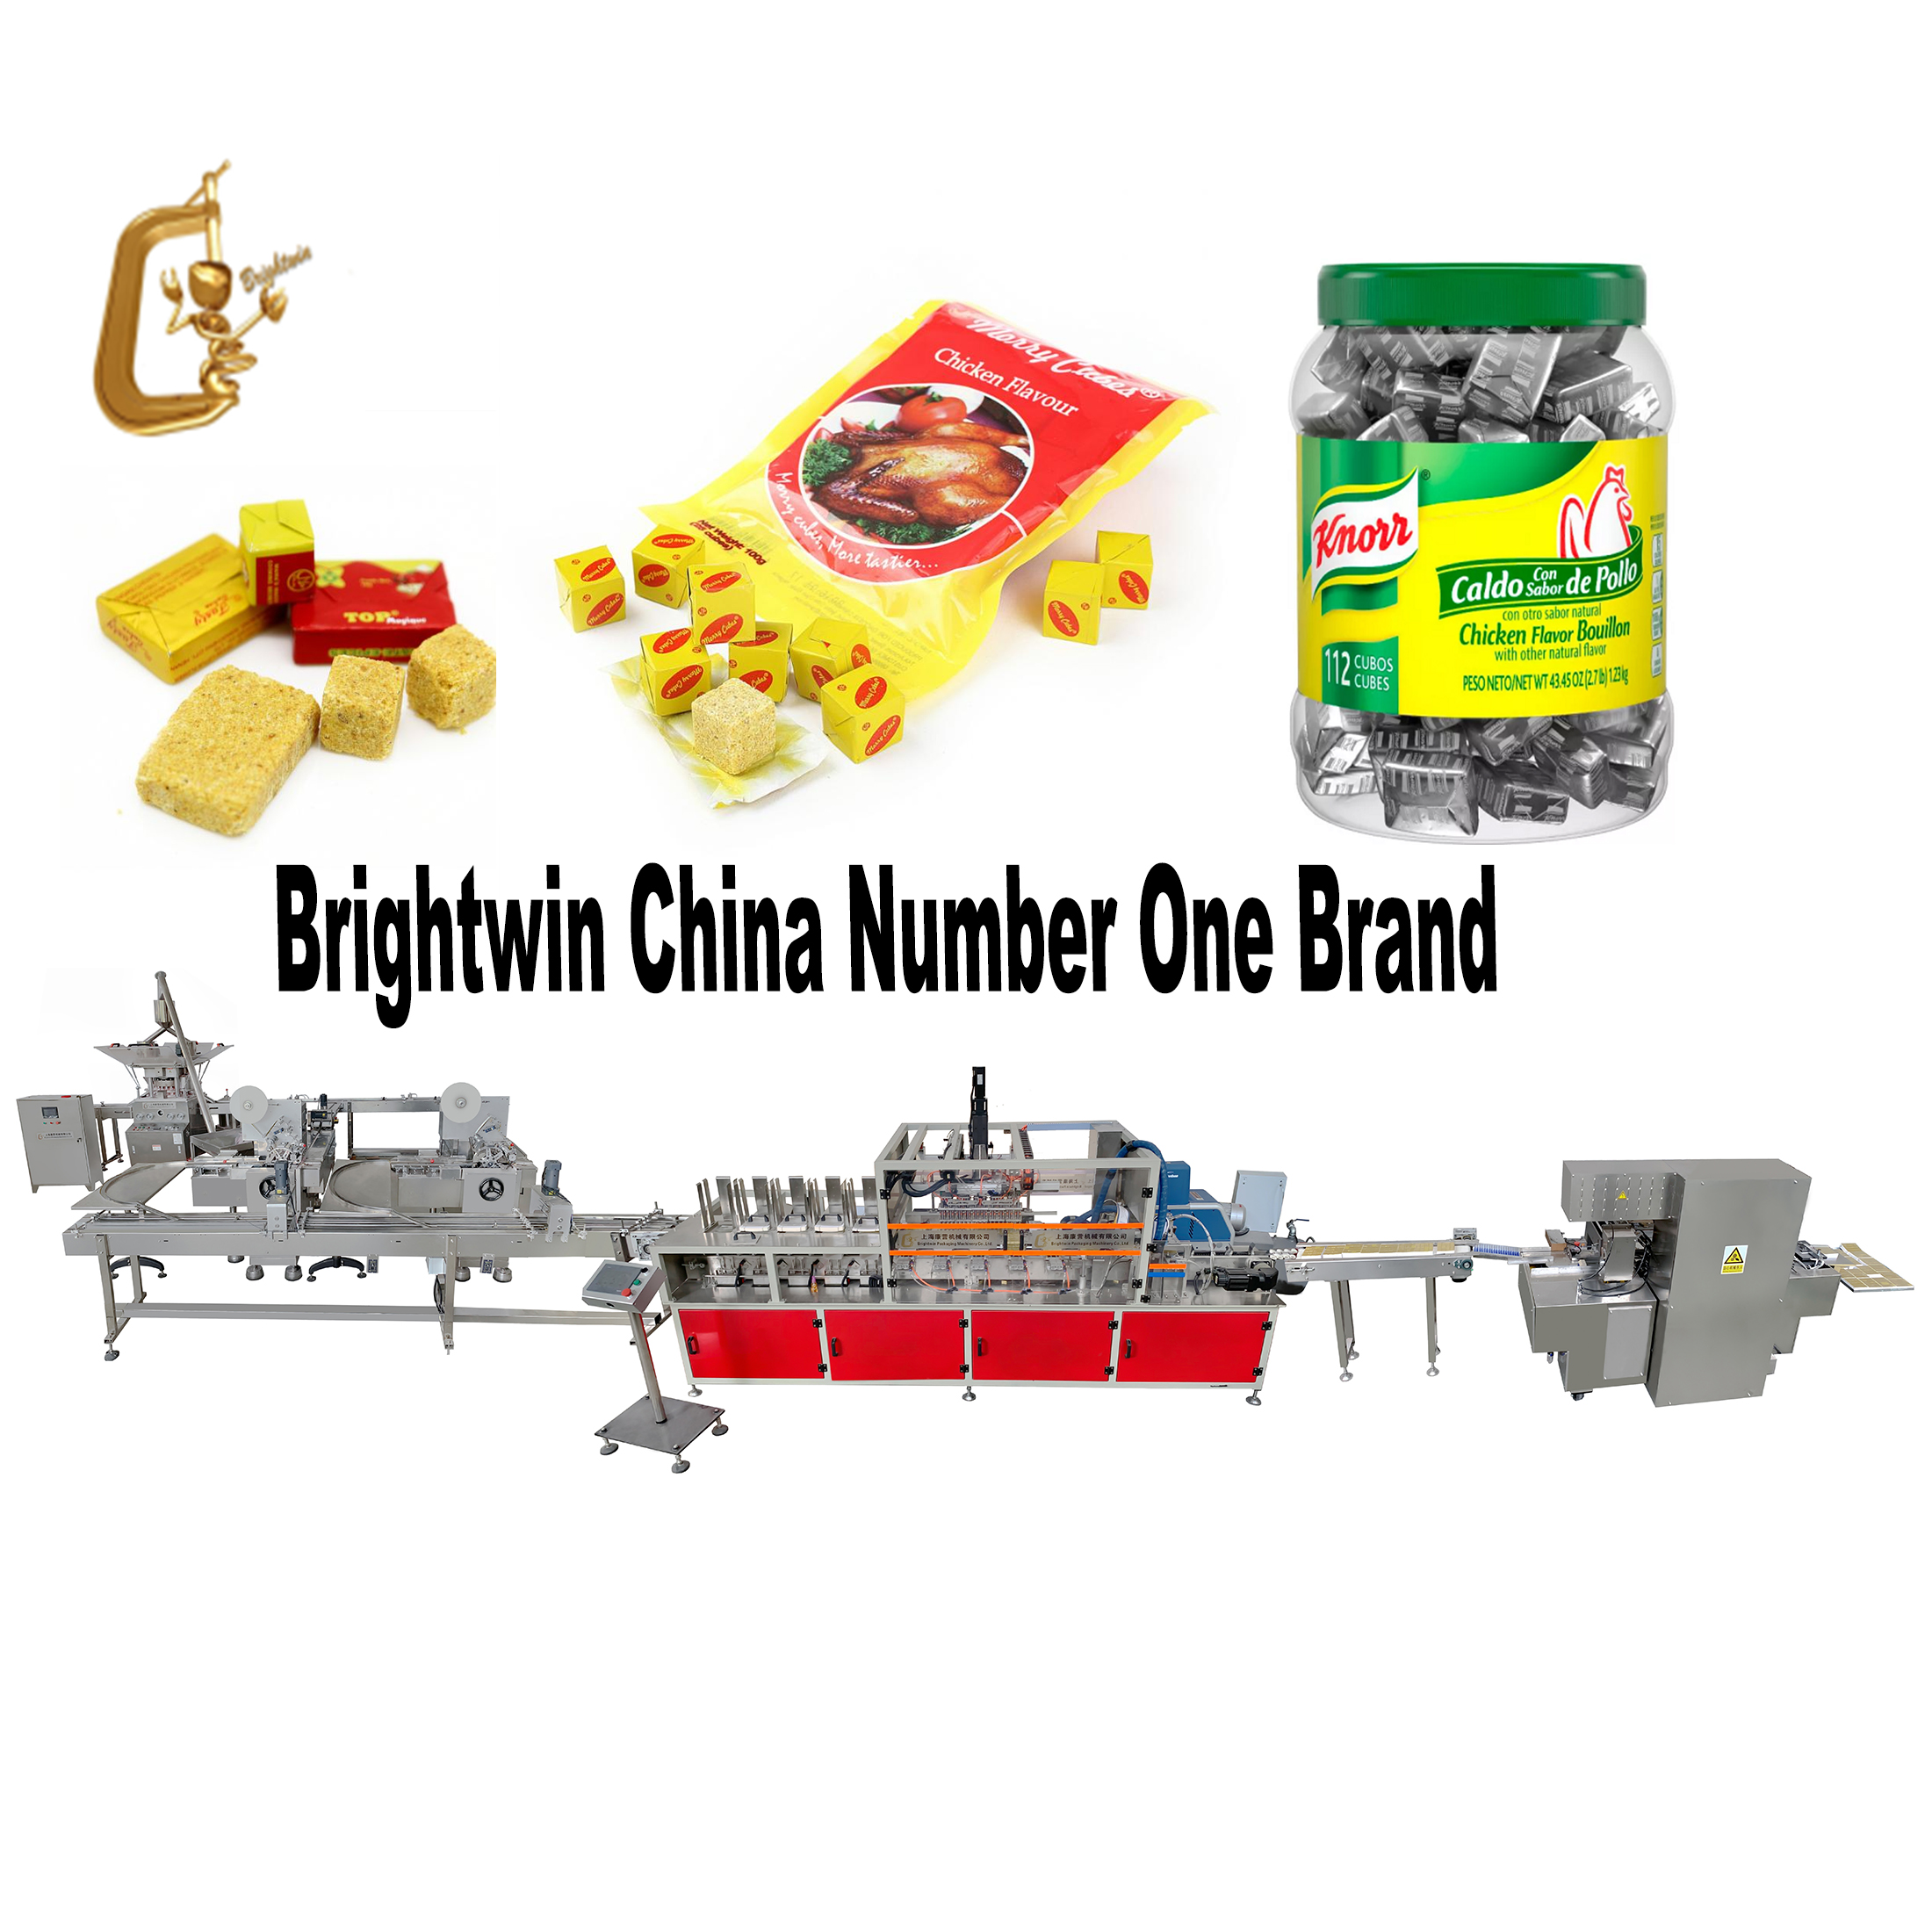 Shanghai Brightwin magi cube production line chicken broth production line bouillon production line Featured Image